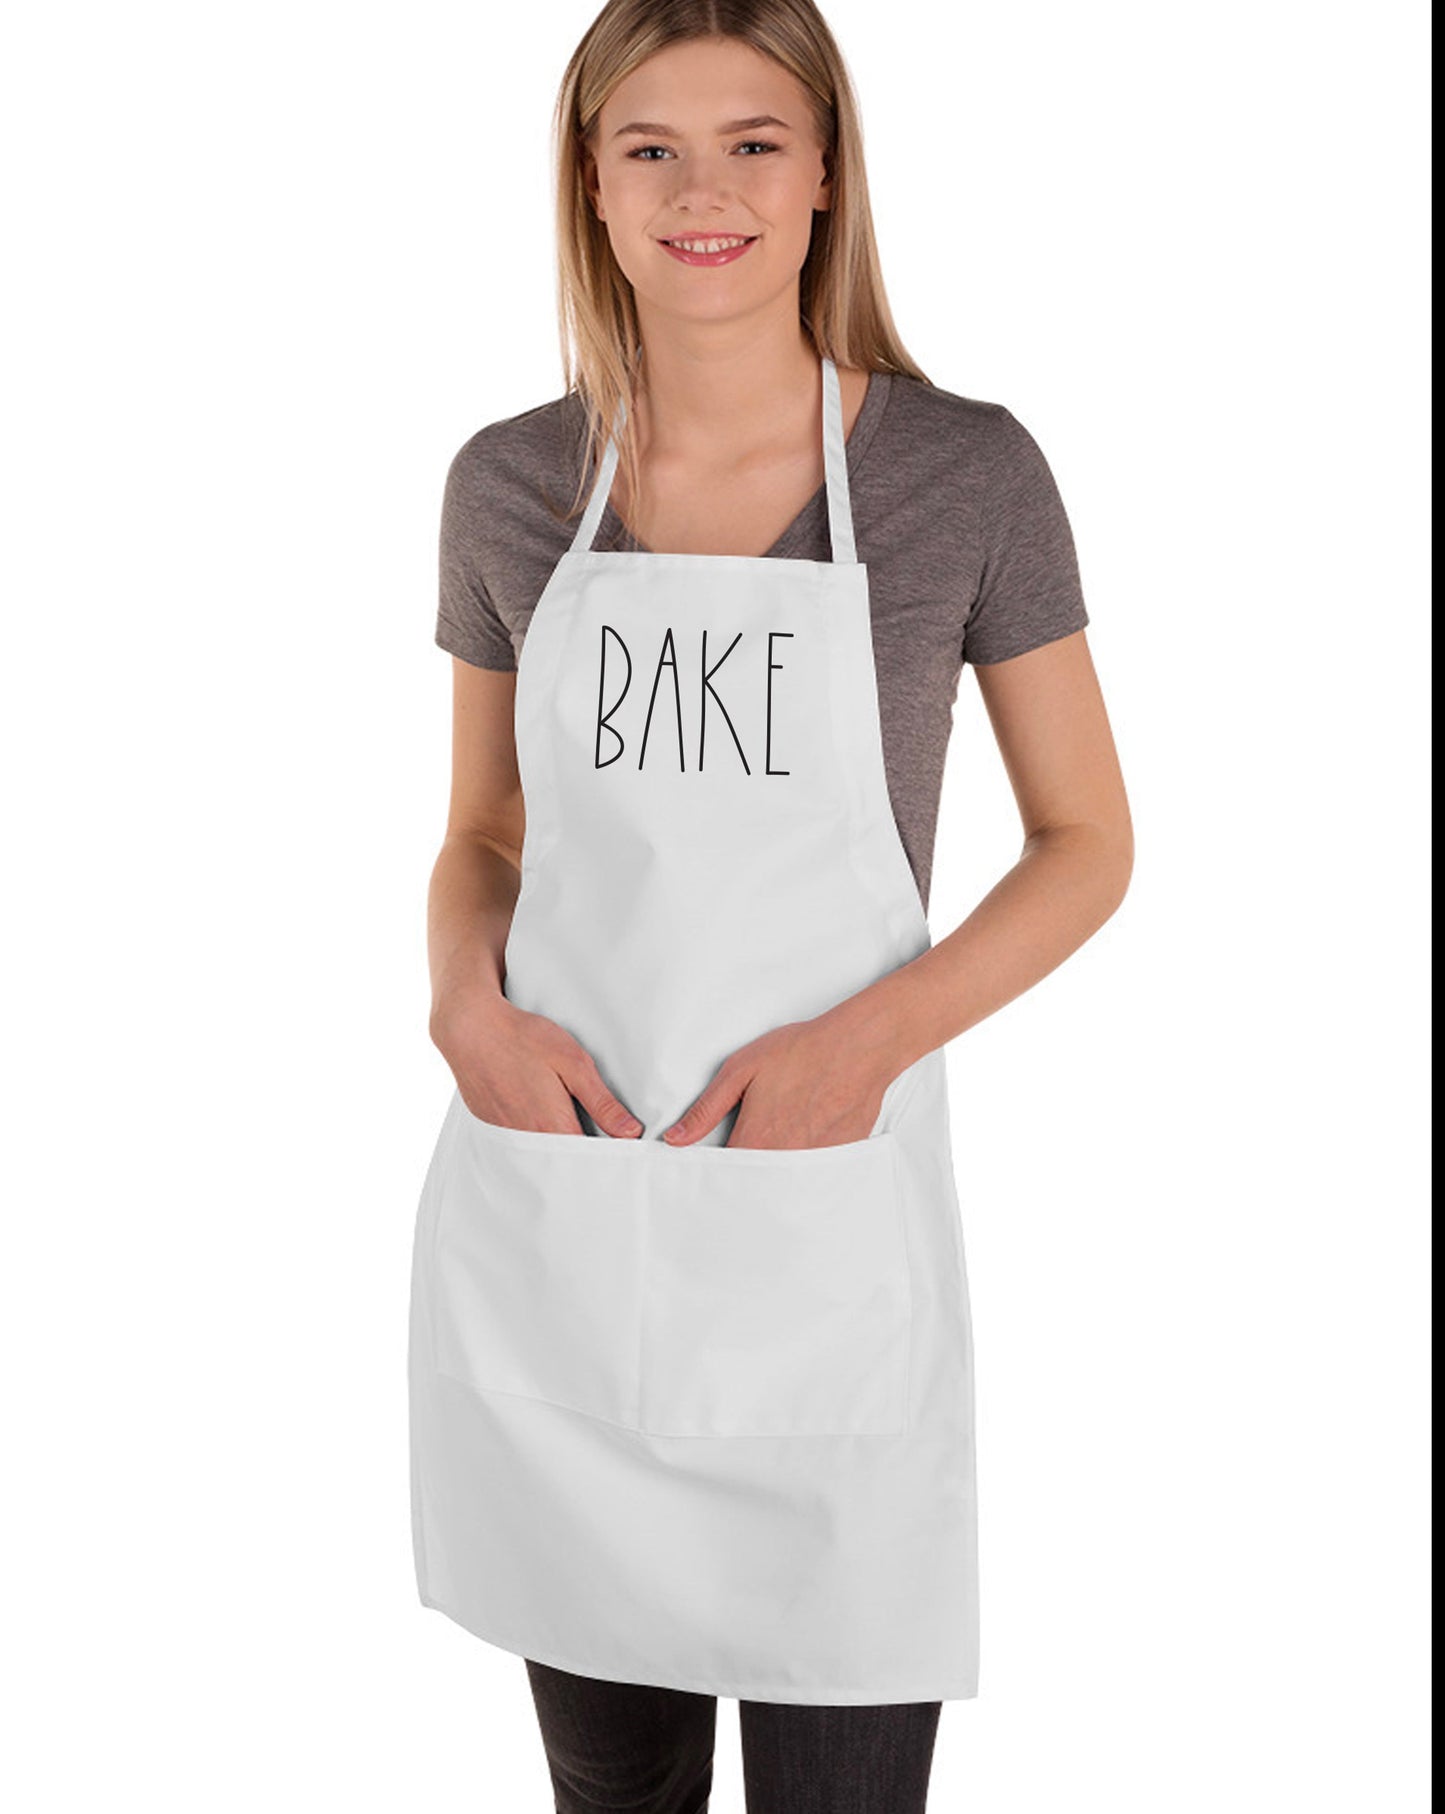 
                  
                    a young woman wearing a bake apron by peculiar people designs
                  
                